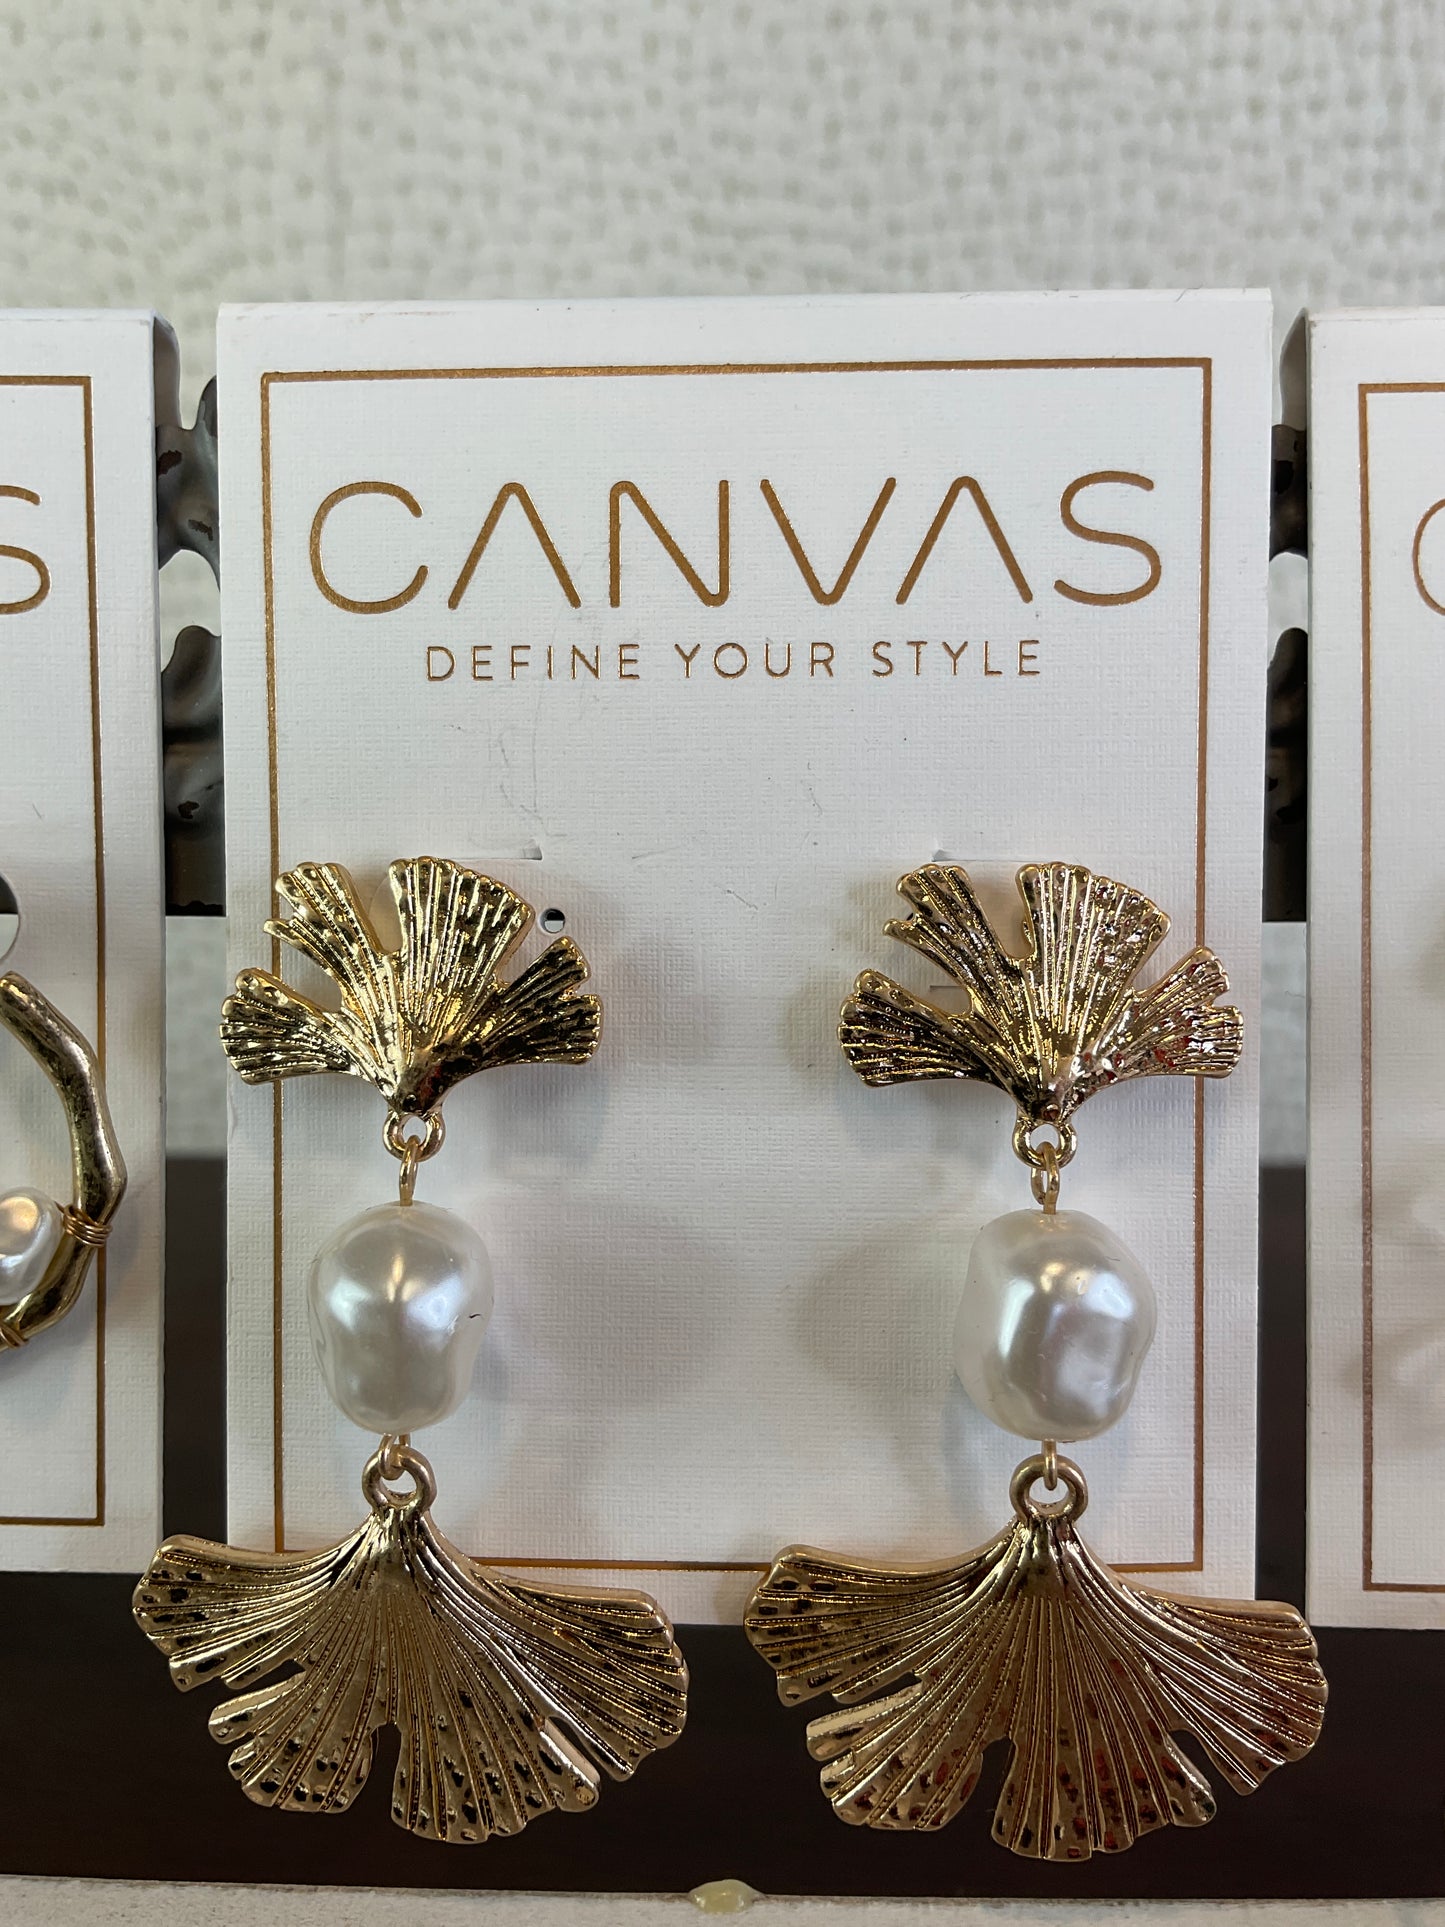 Canvas Style Gold Tone Earrings, Sold Separately